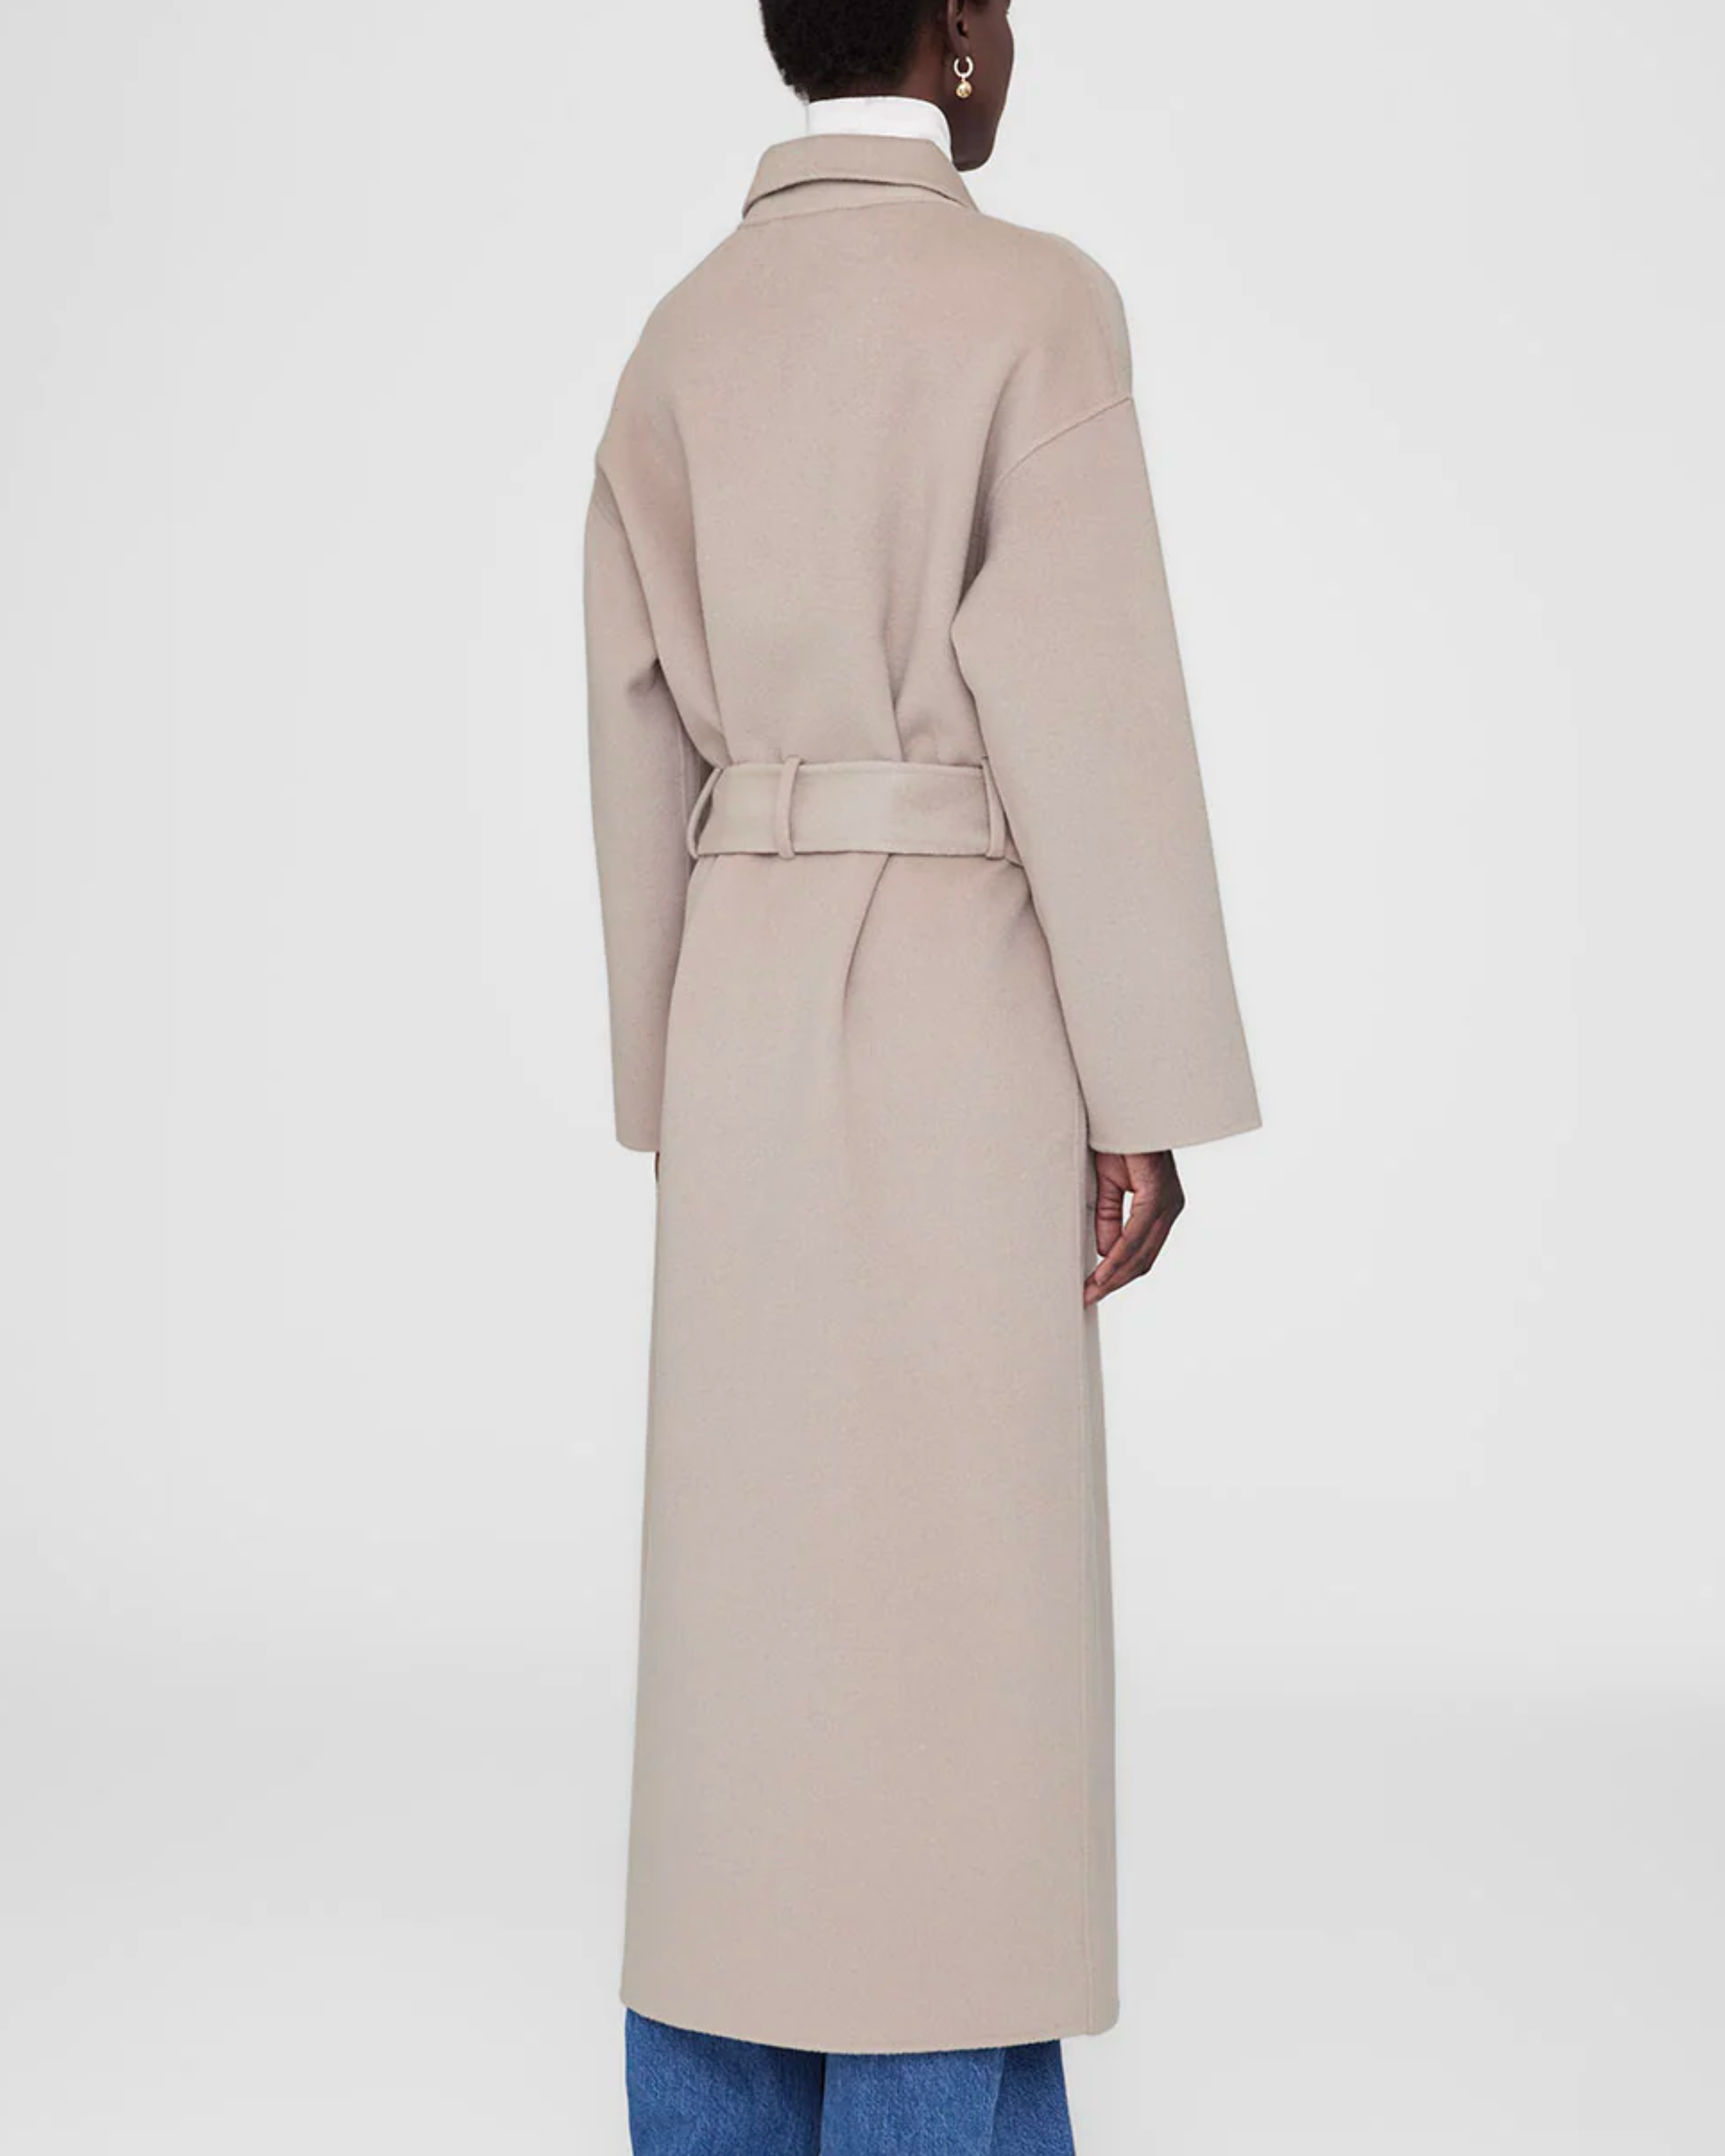 Anine Bing Dylan Maxi Coat in Taupe Cashmere